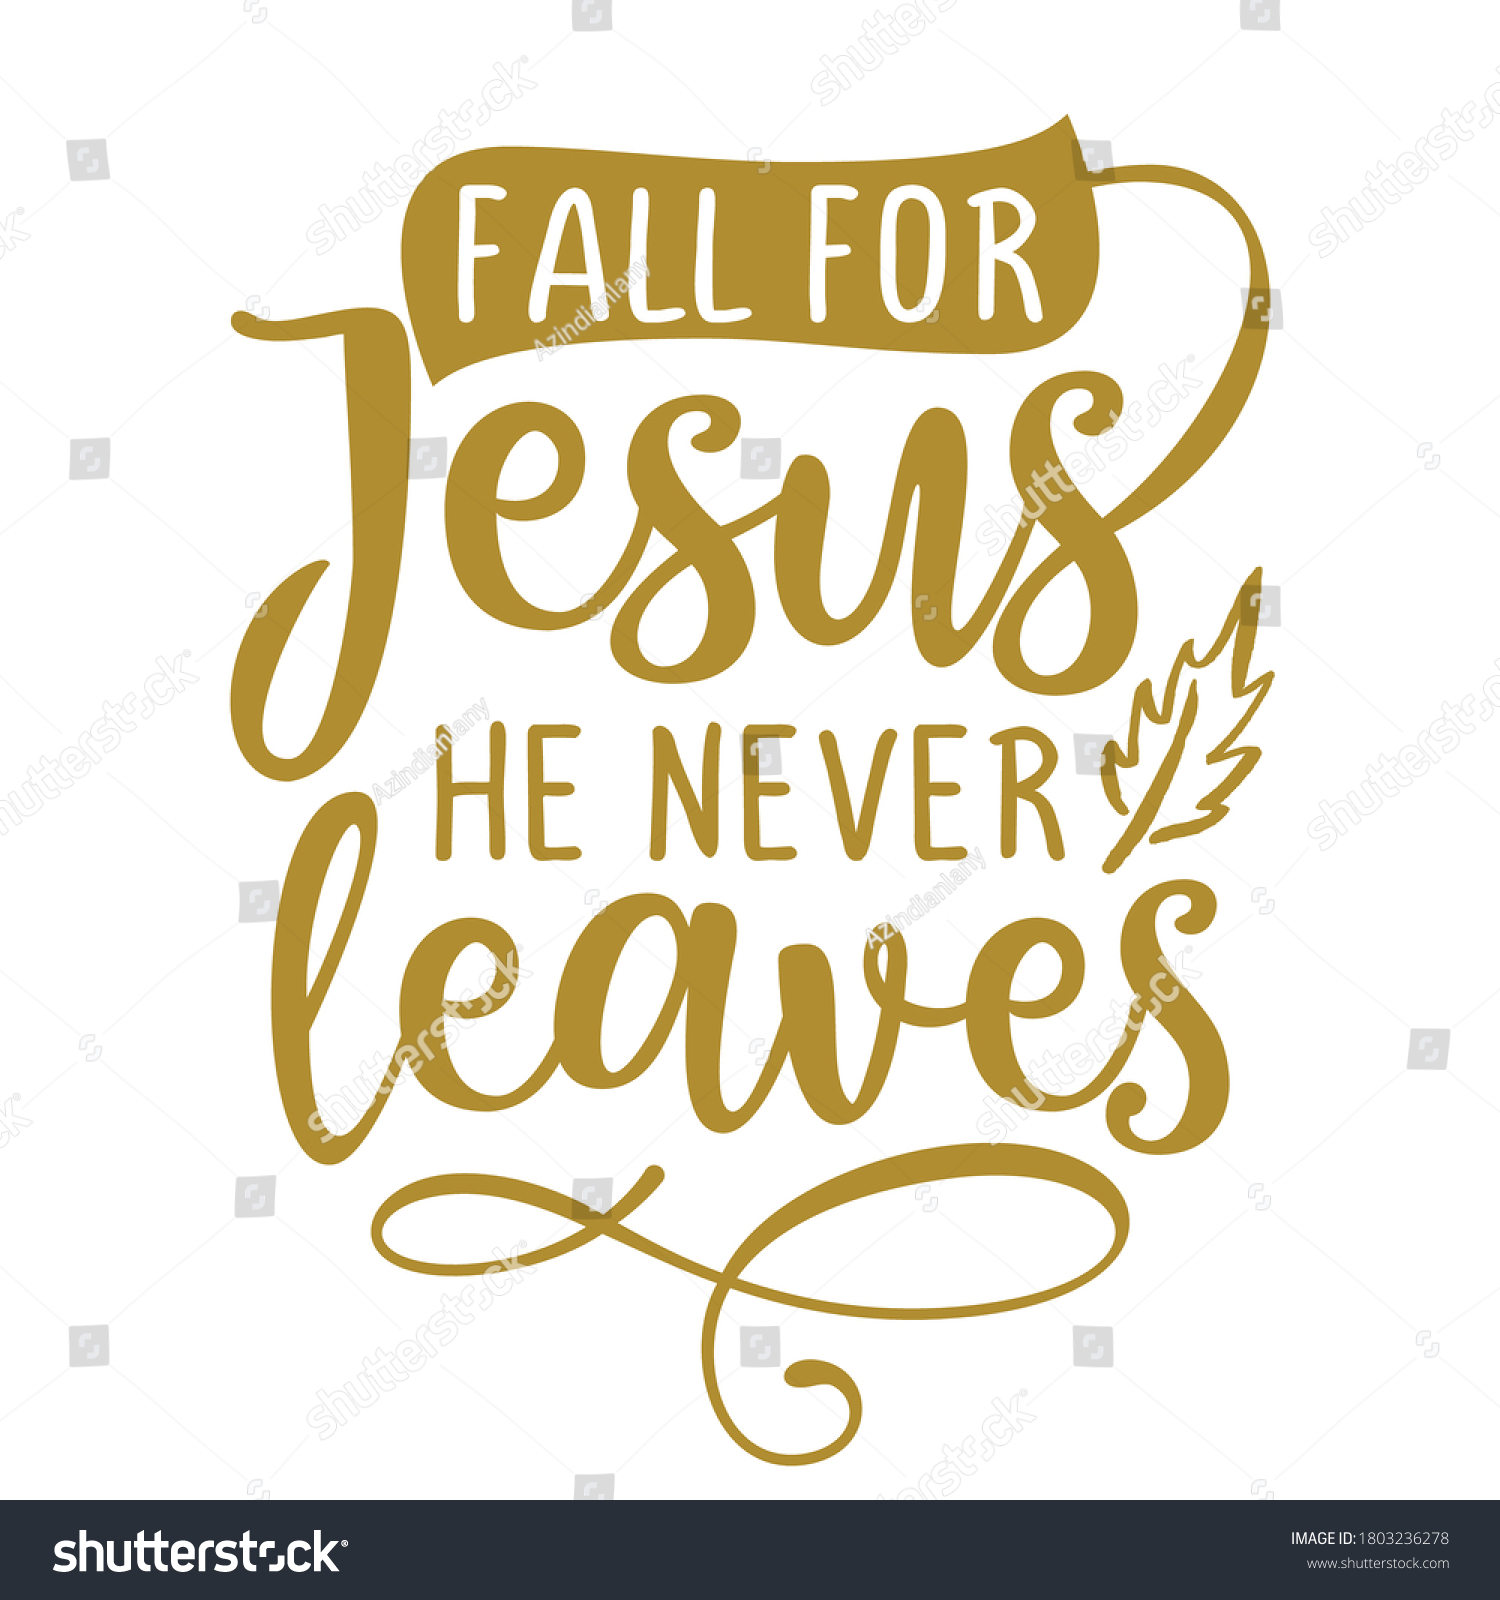 Fall Jesus He Never Leaves Inspirational Stock Vector (Royalty Free) 1803.....